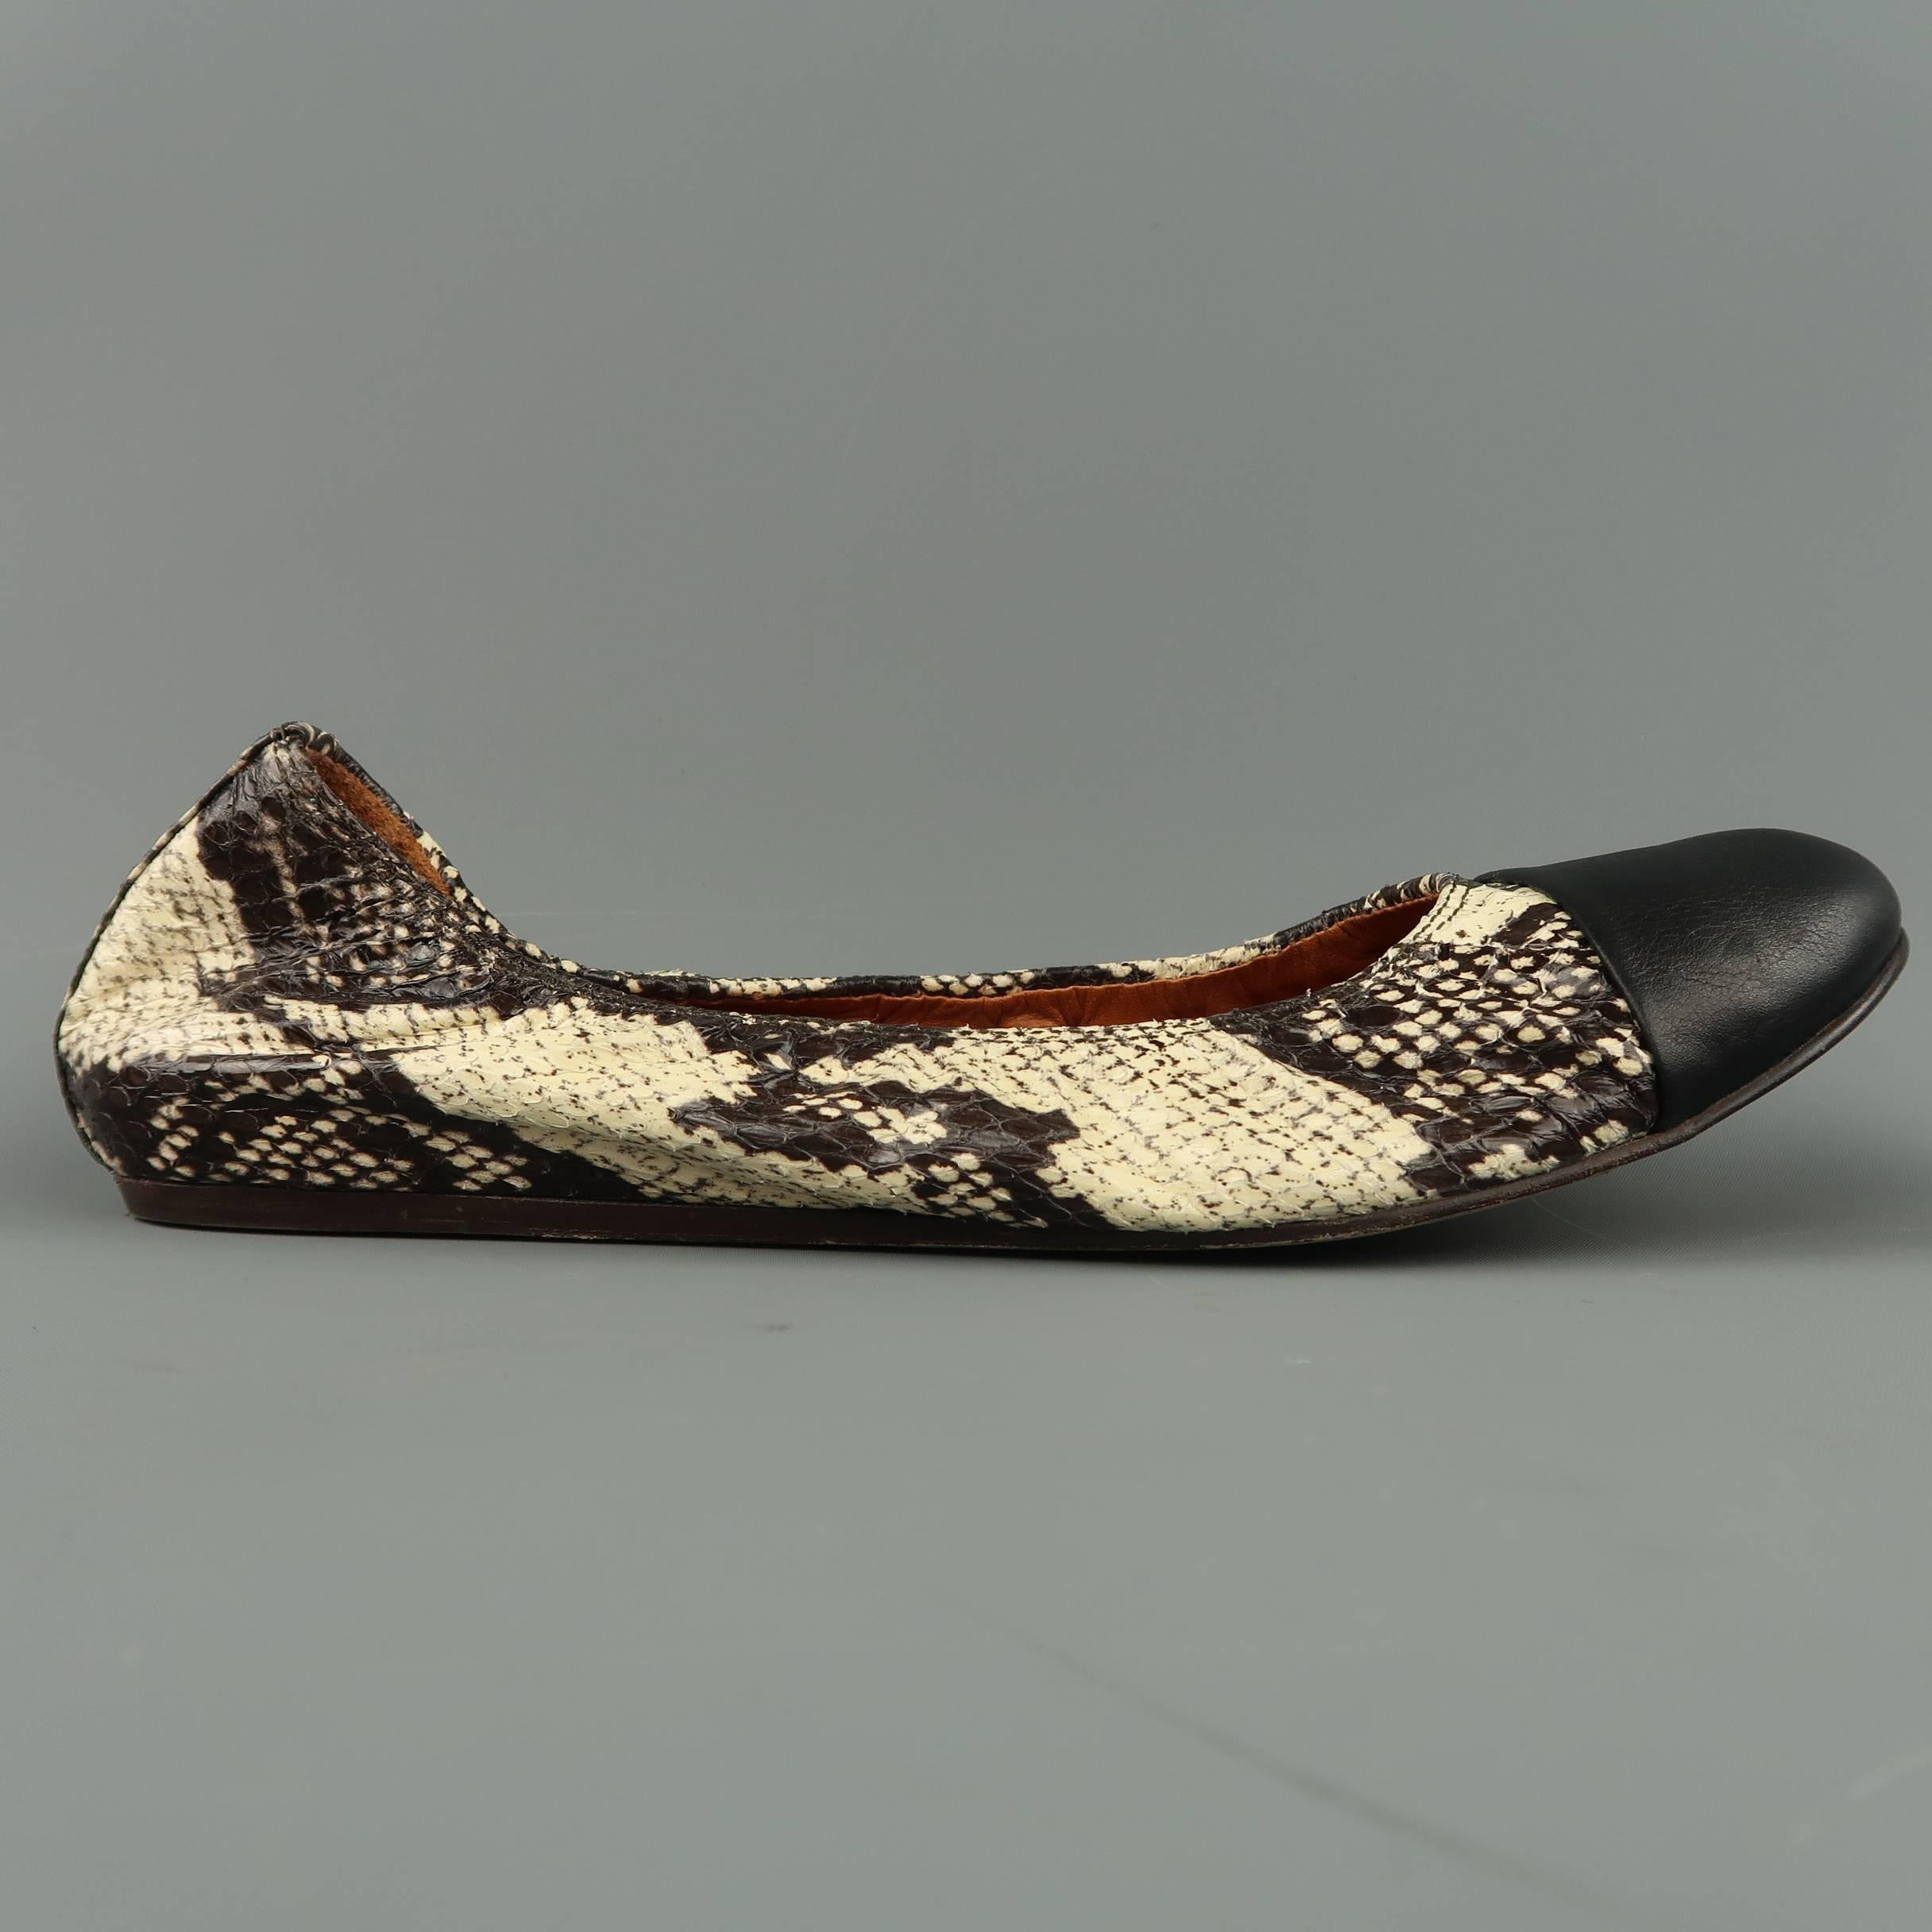 LANVIN ballet flats come in beige and black snakeskin leather with a round cap toe and stretch toe line.
 
Good Pre-Owned Condition.
Marked: IT 40.5
 
Outsole: 10.5 x 3.25 in